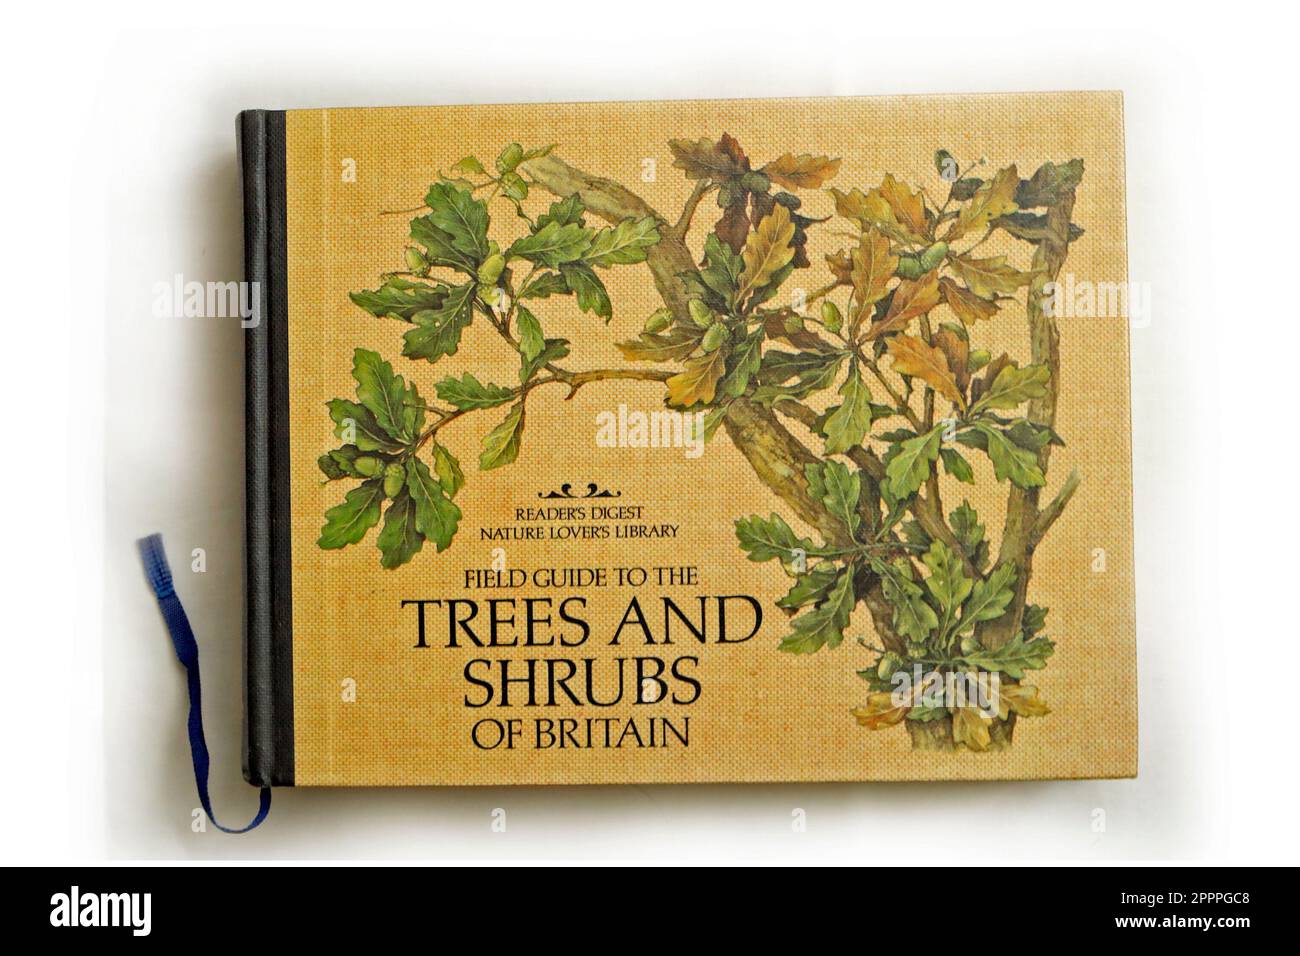 Libro hardback su sfondo bianco - Reader's Digest Nature Lovers library - Field Guide to the Trees and Shrubs of Britain Foto Stock